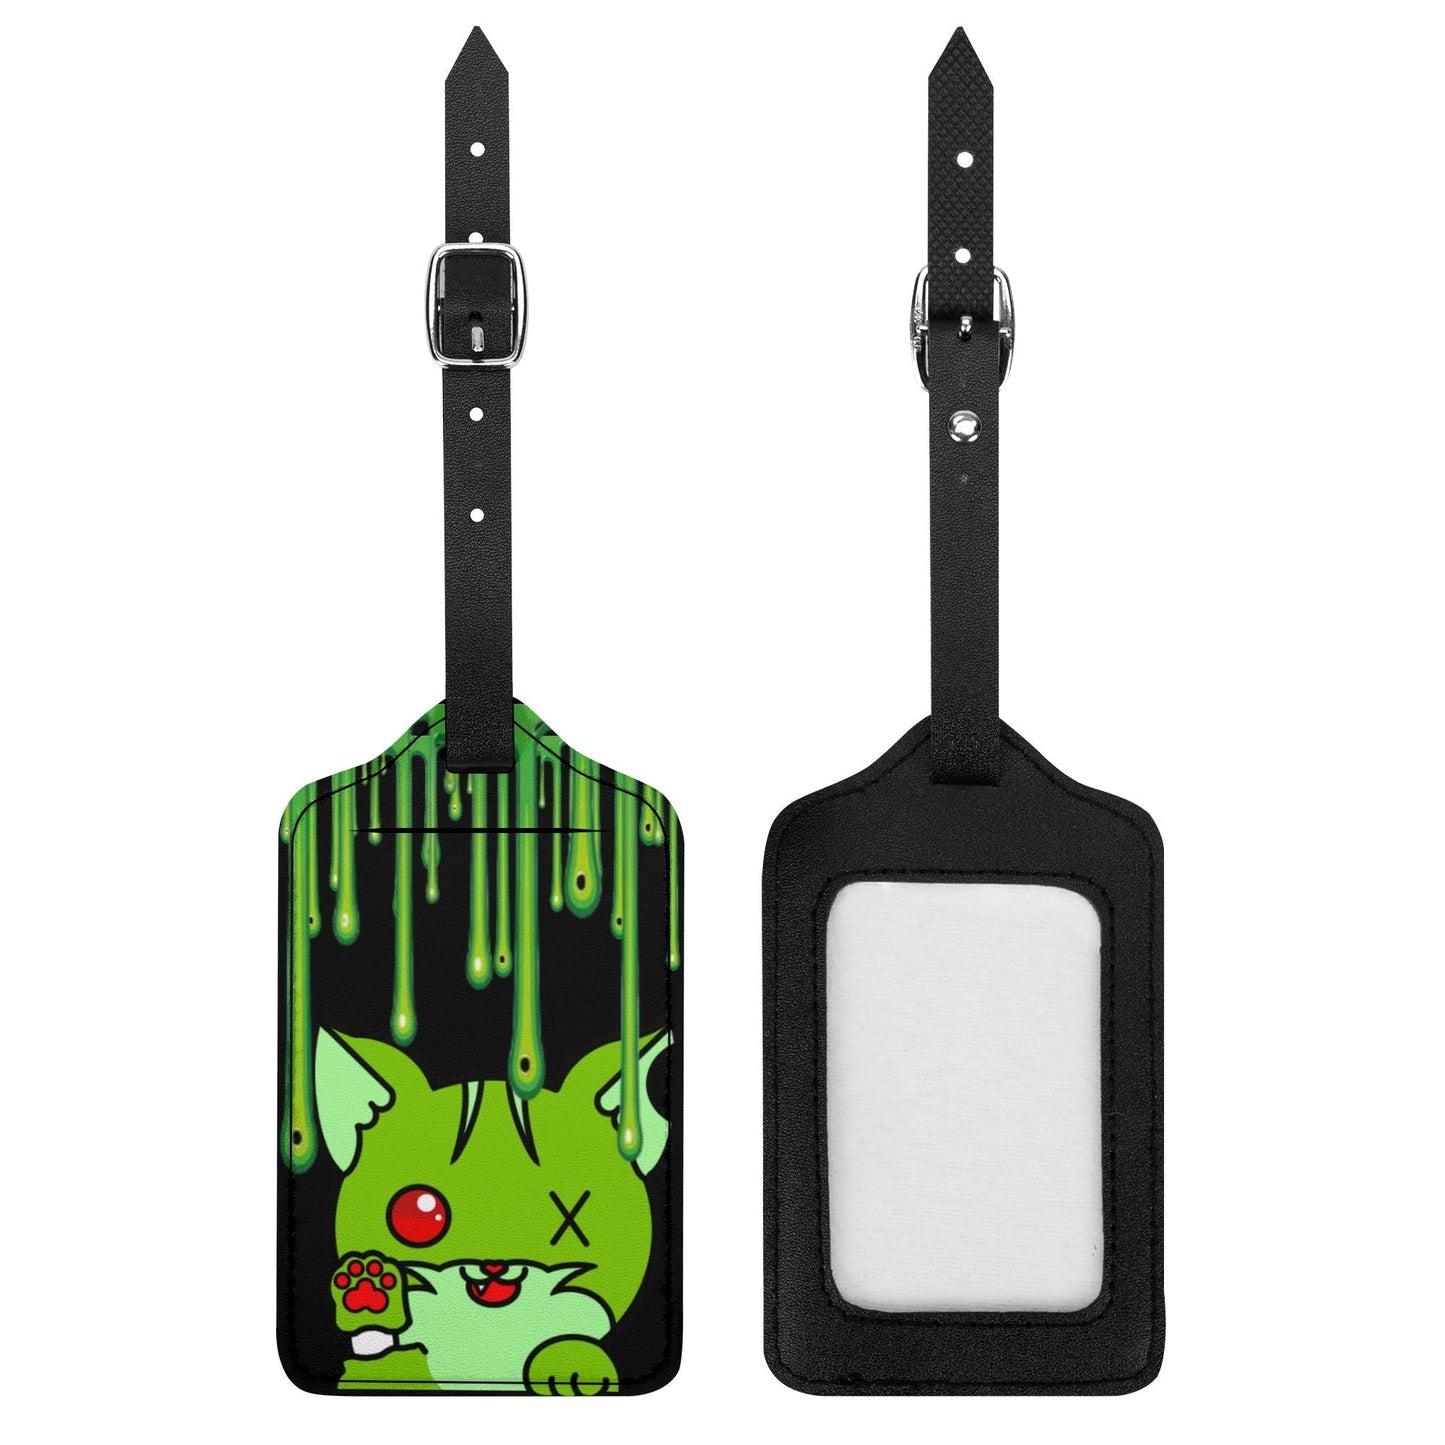 Stand out  with the  Nuggieween Ooze Drip Luggage Tags  available at Hey Nugget. Grab yours today!